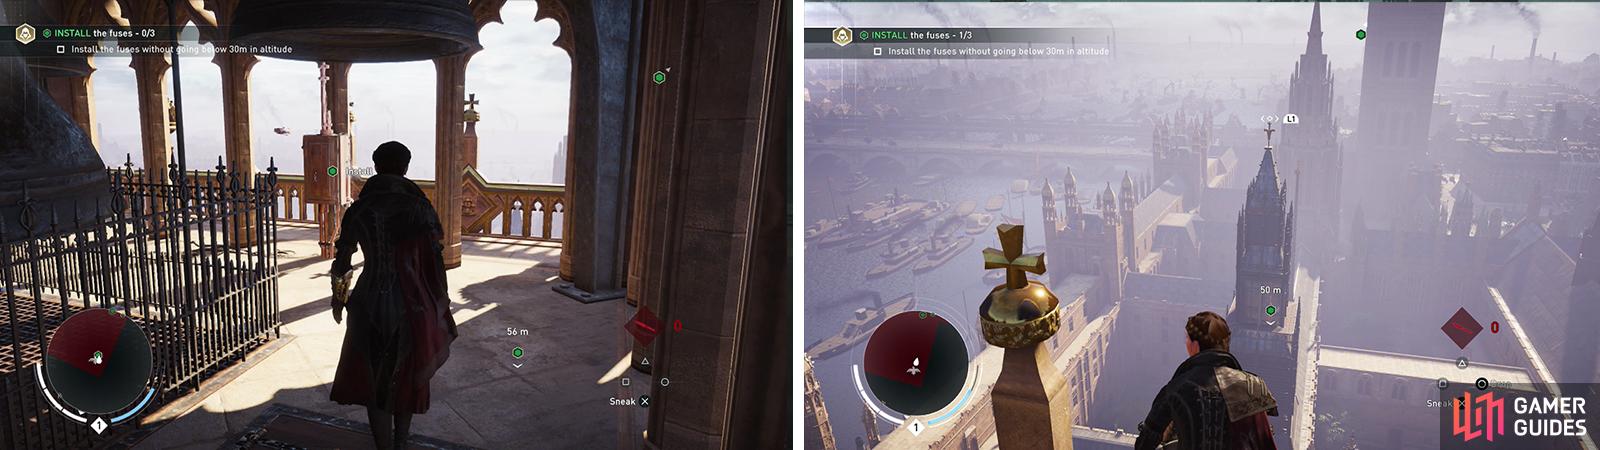 You'll need to disable three fuses (left). Use the rope launcher between the spires to stay above 30 meters (right).